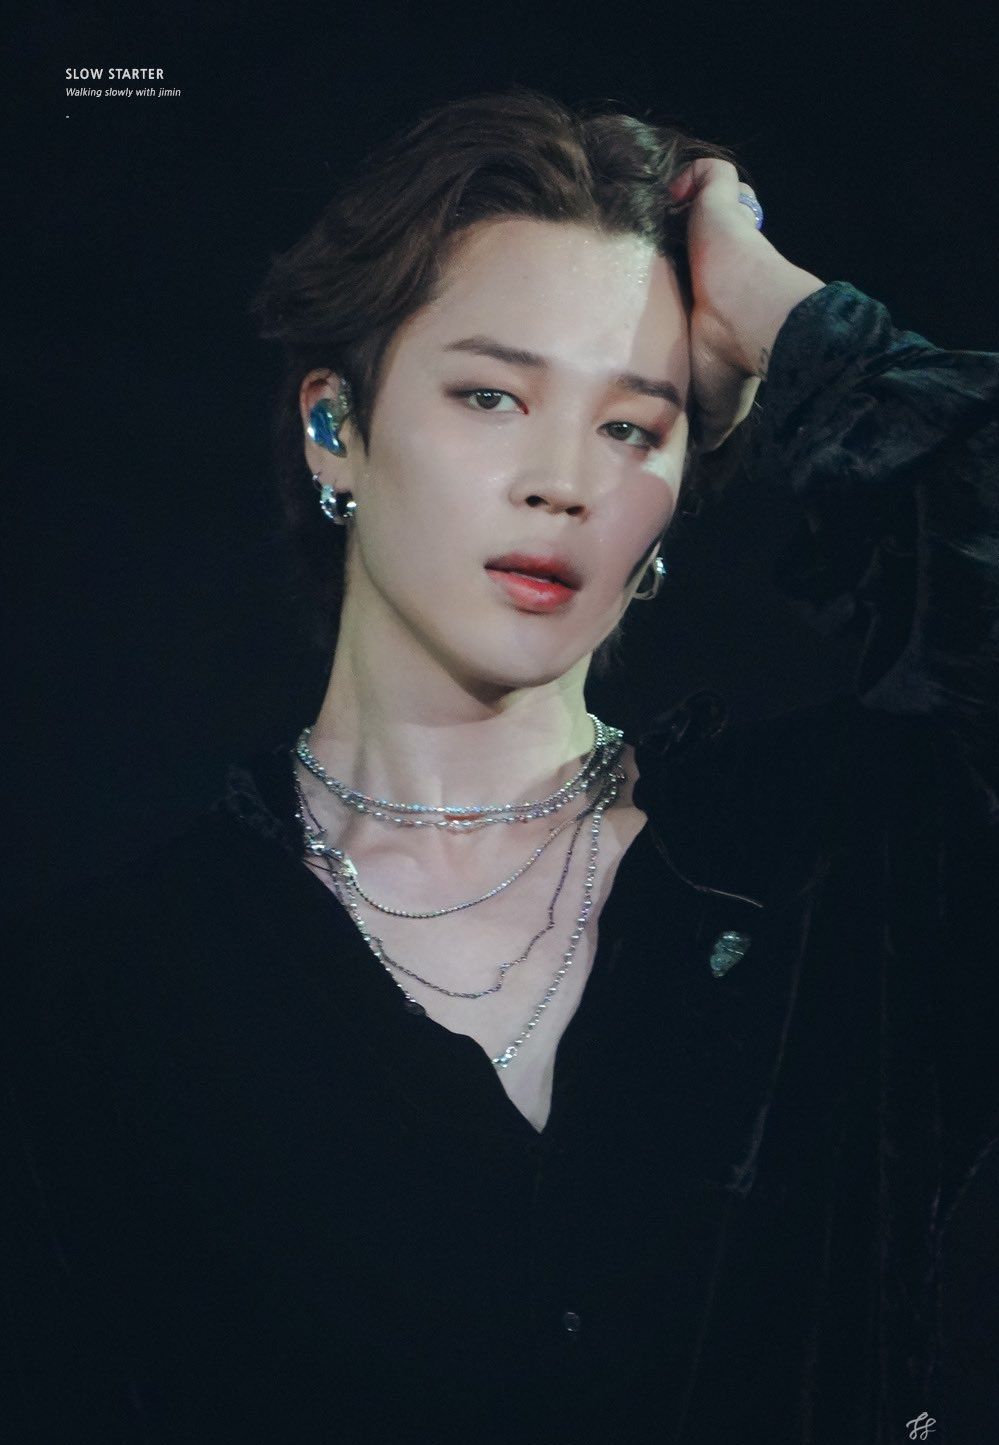 10+ Unedited Photos Of BTS's Jimin From The 